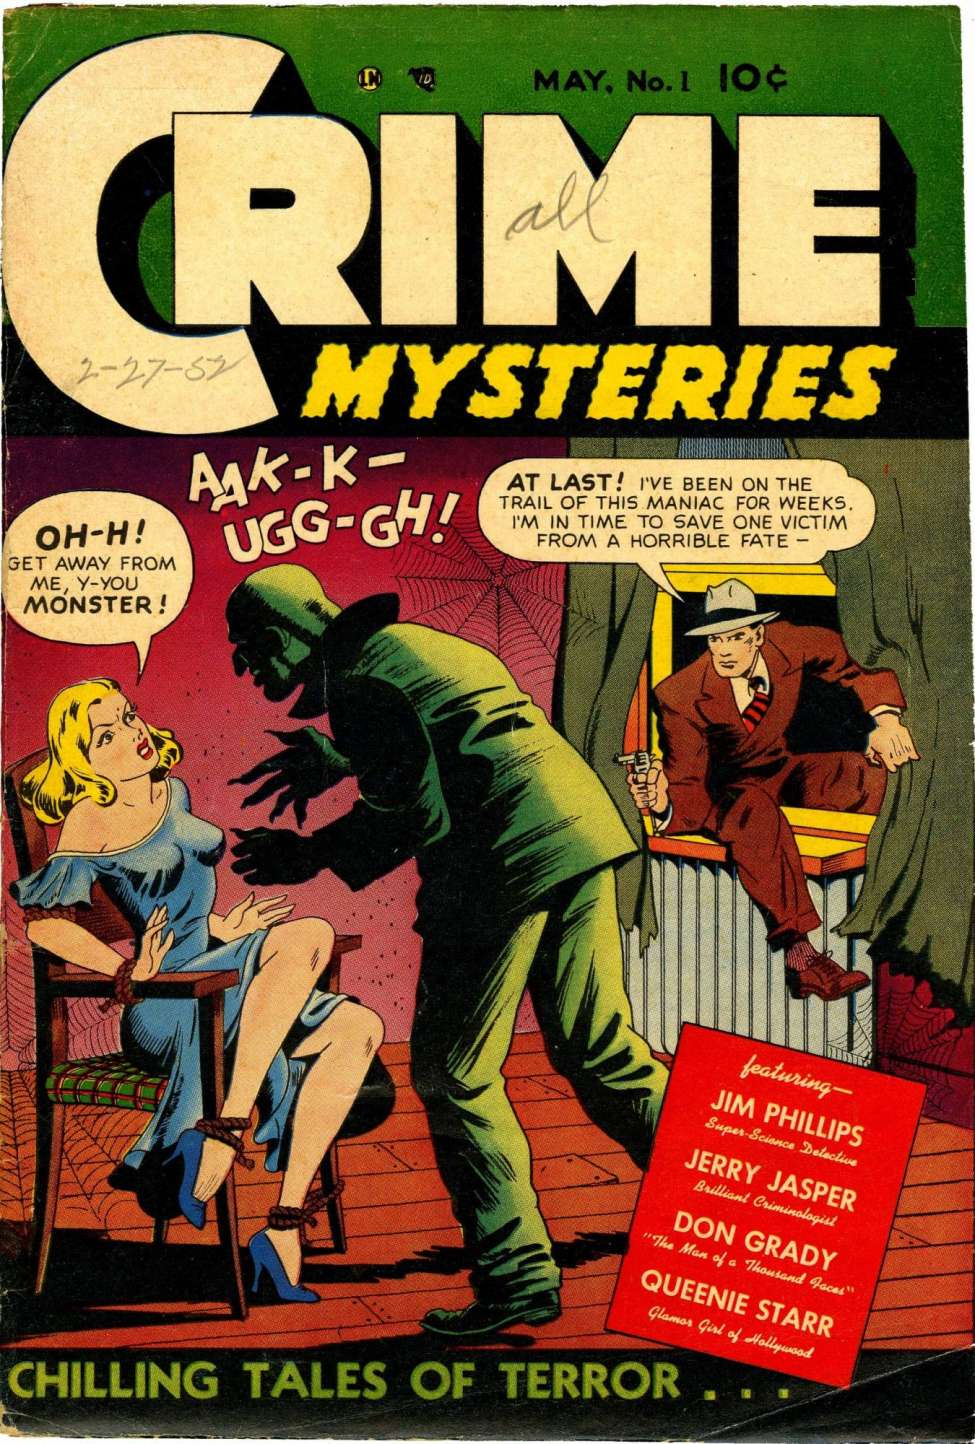 Book Cover For Crime Mysteries 1